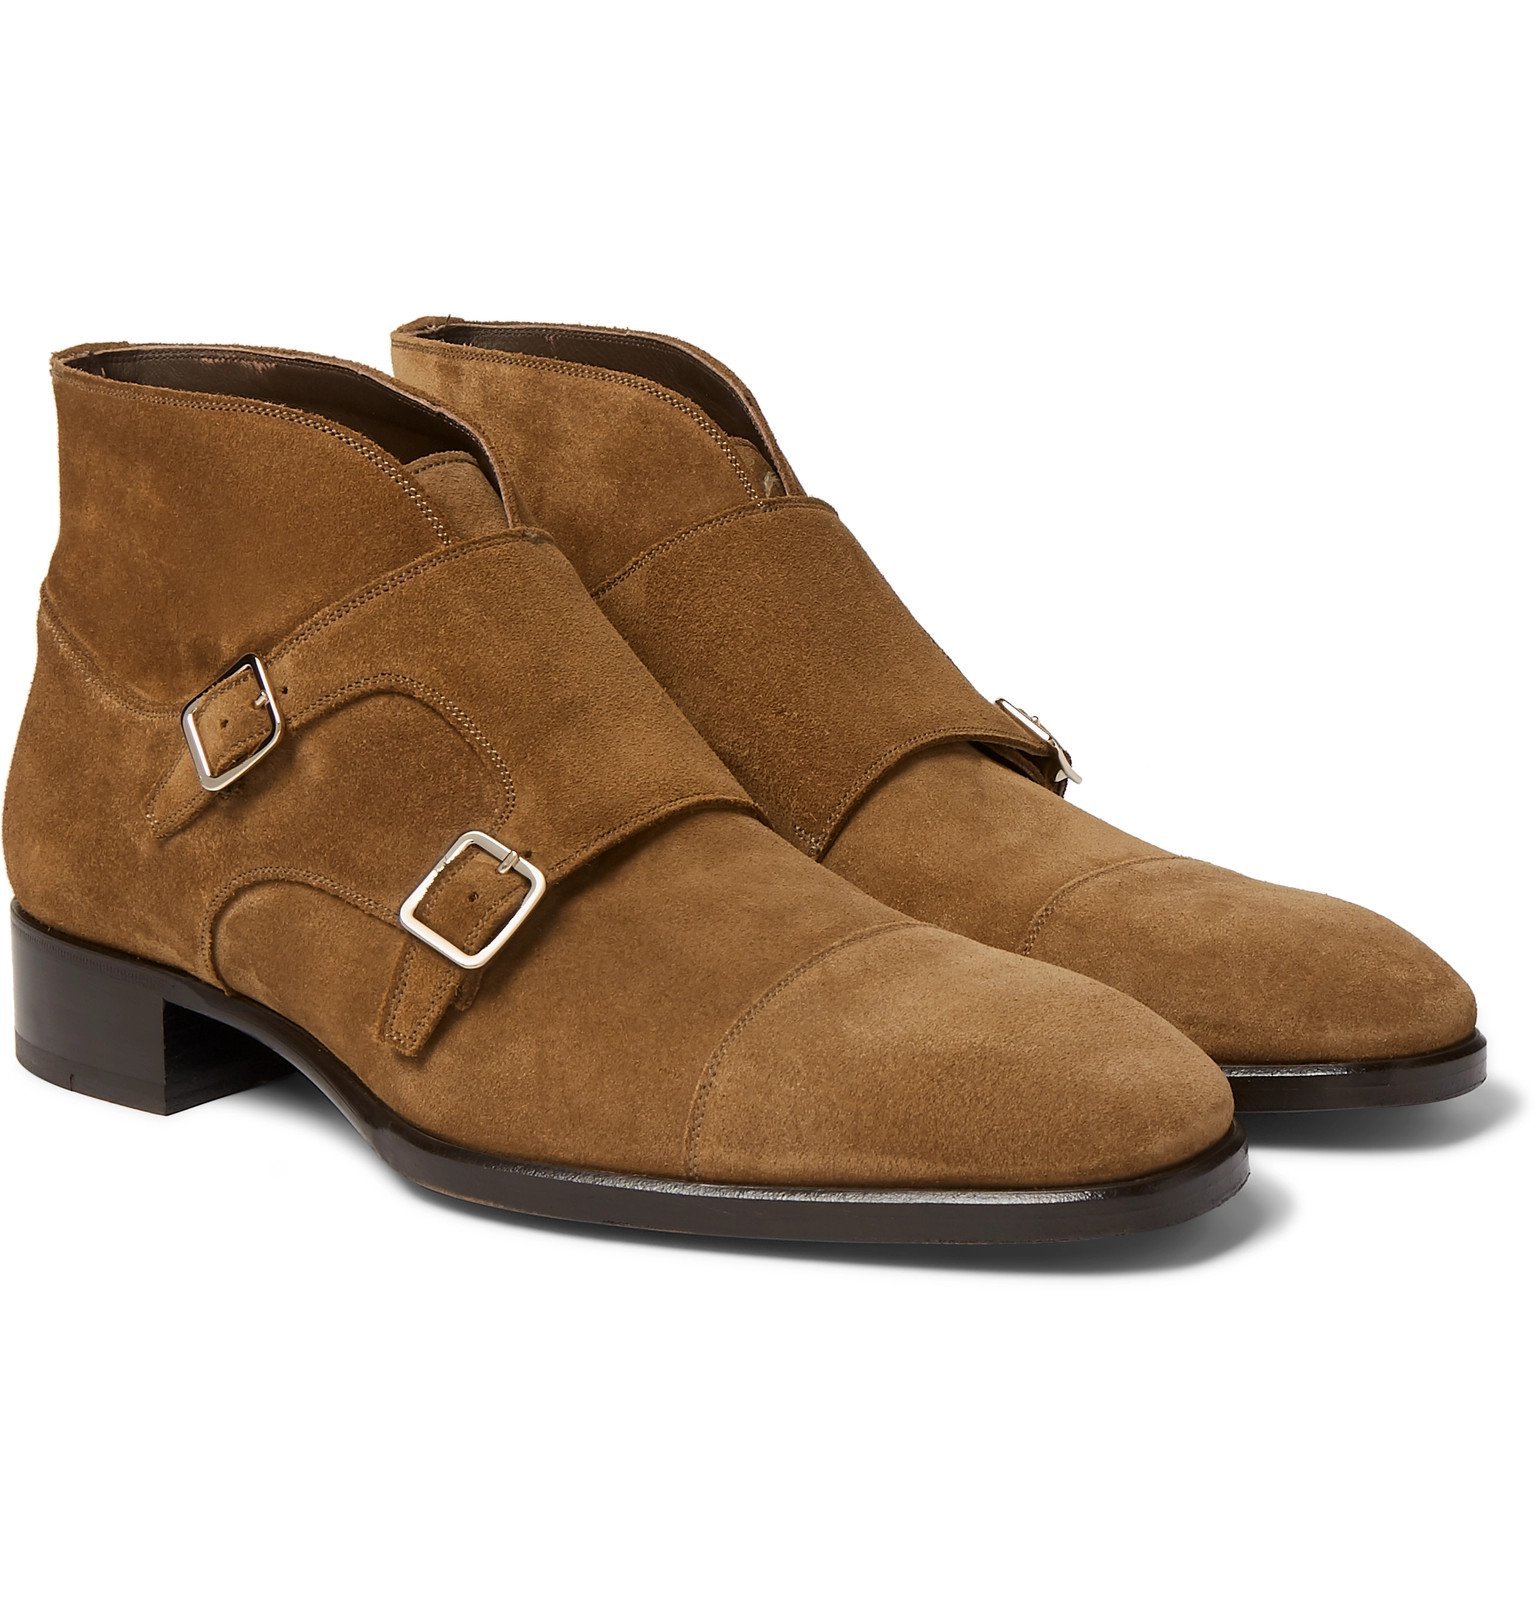 TOM FORD - Sutherland Suede Monk-Strap Boots - Brown TOM FORD